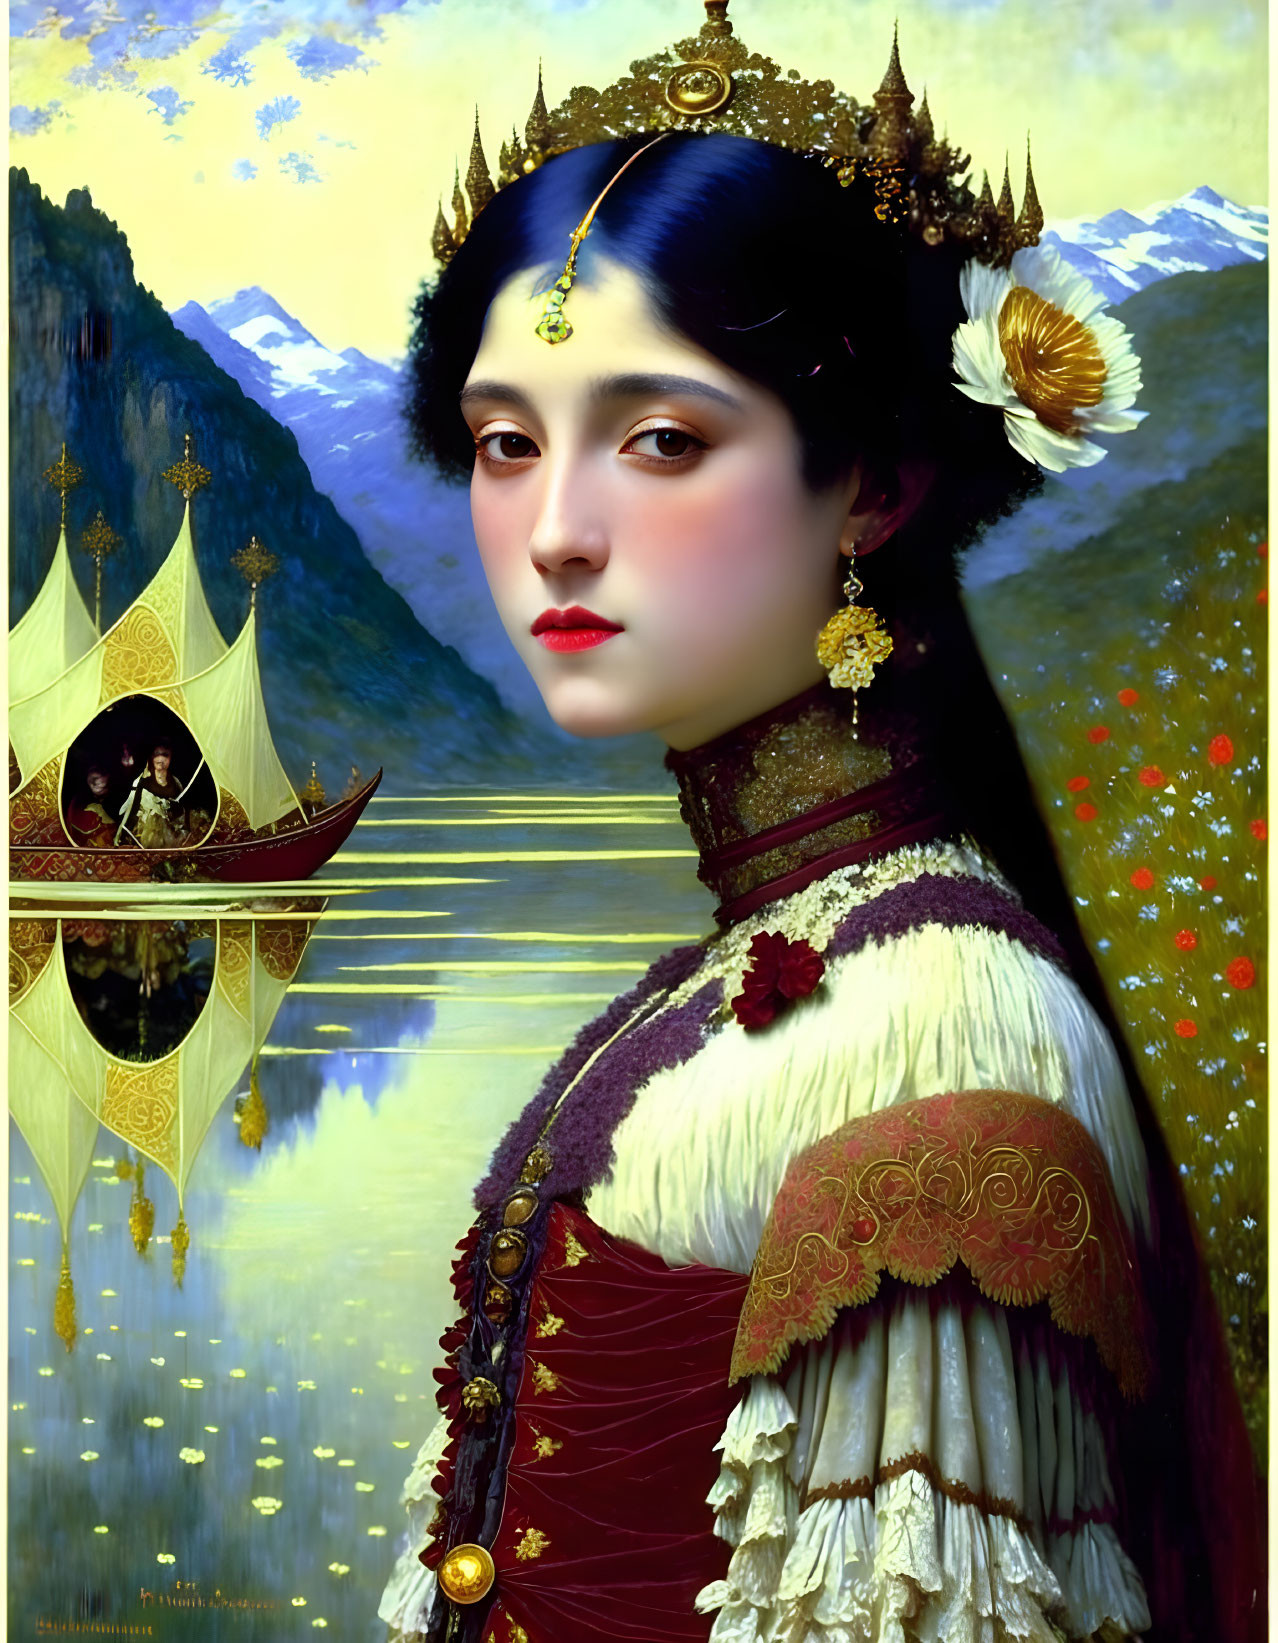 Regal woman in traditional attire by serene lake